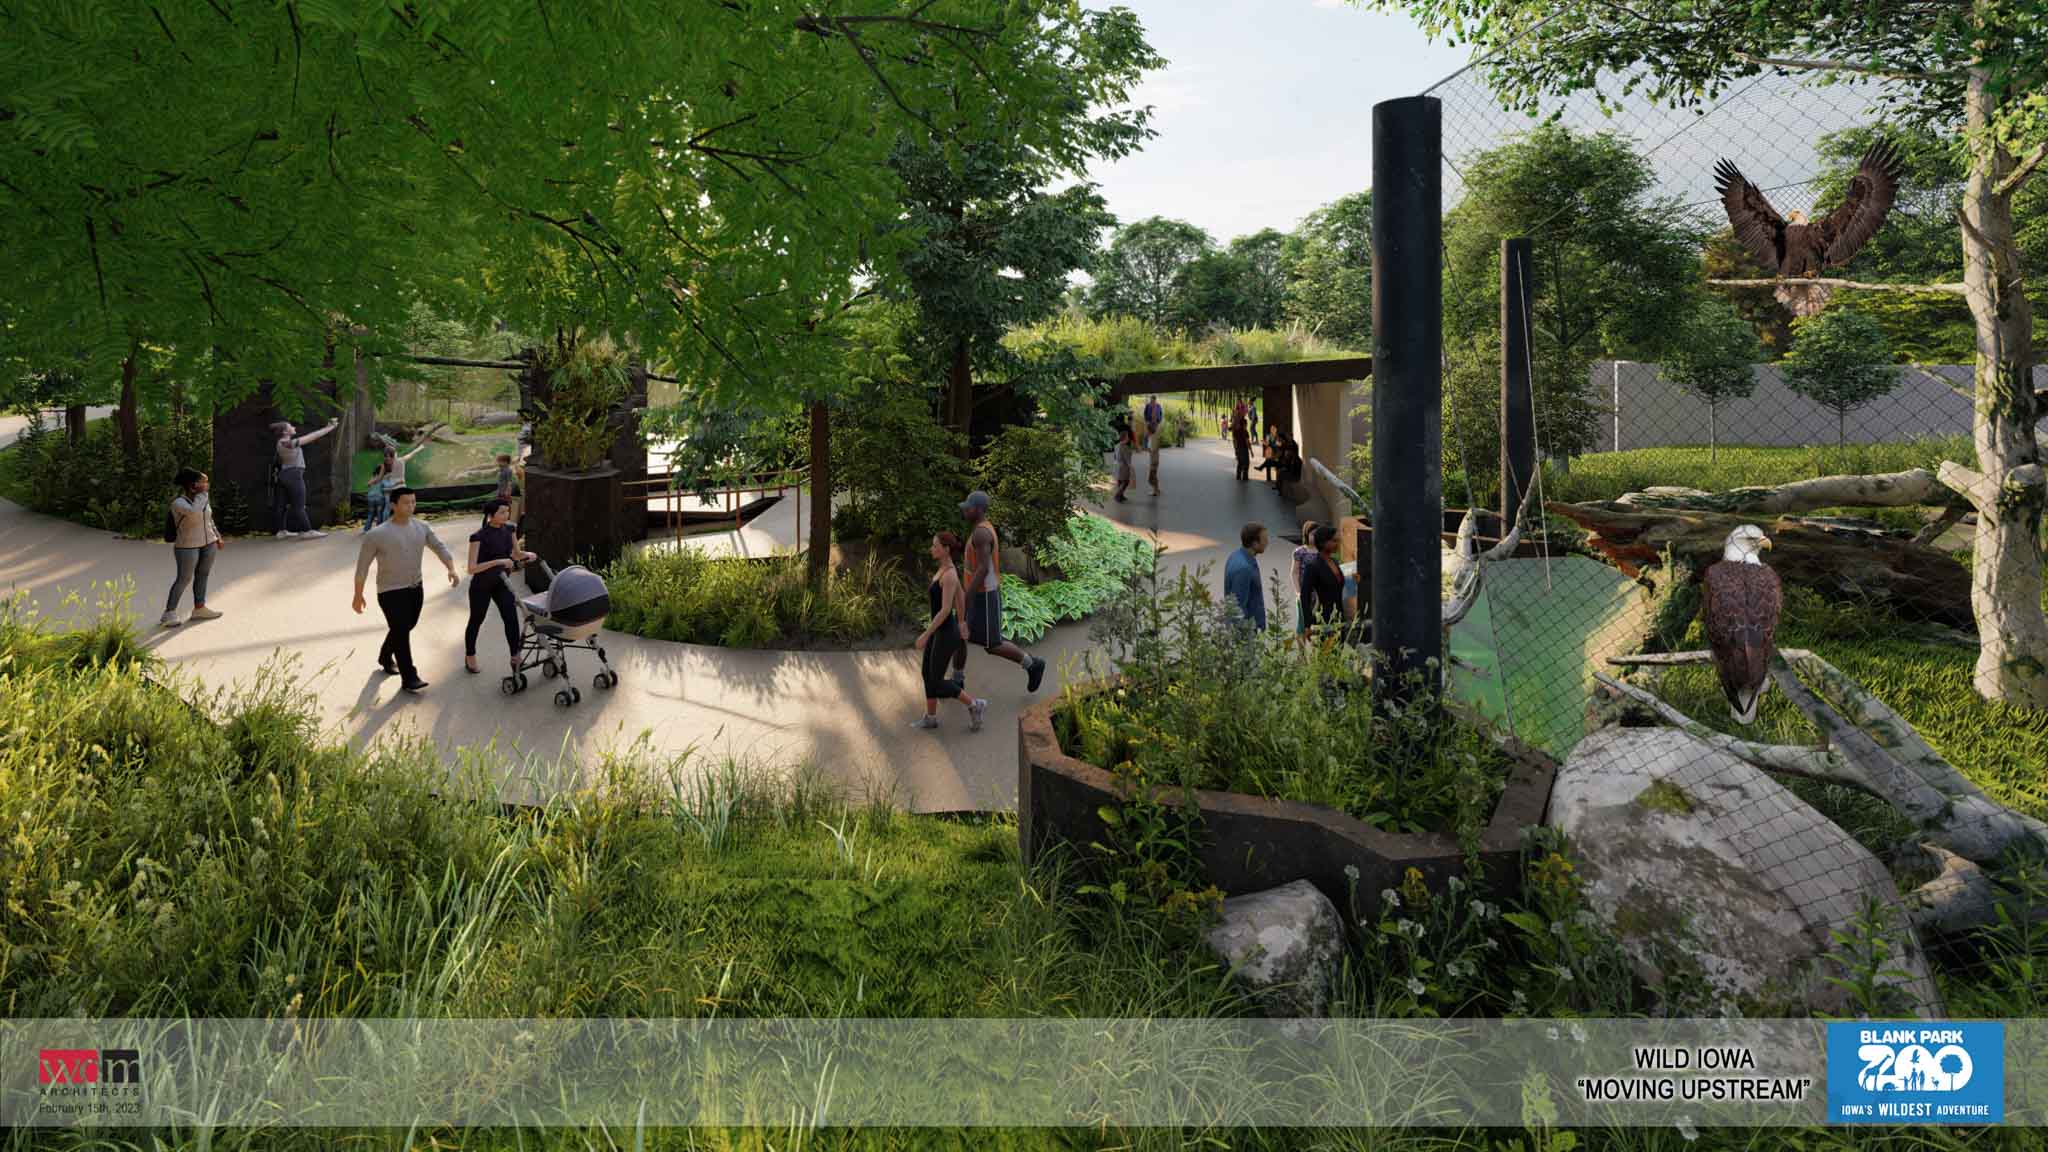 Rendering fo guests walking a path through plants, trees and looking at the eagle habitat